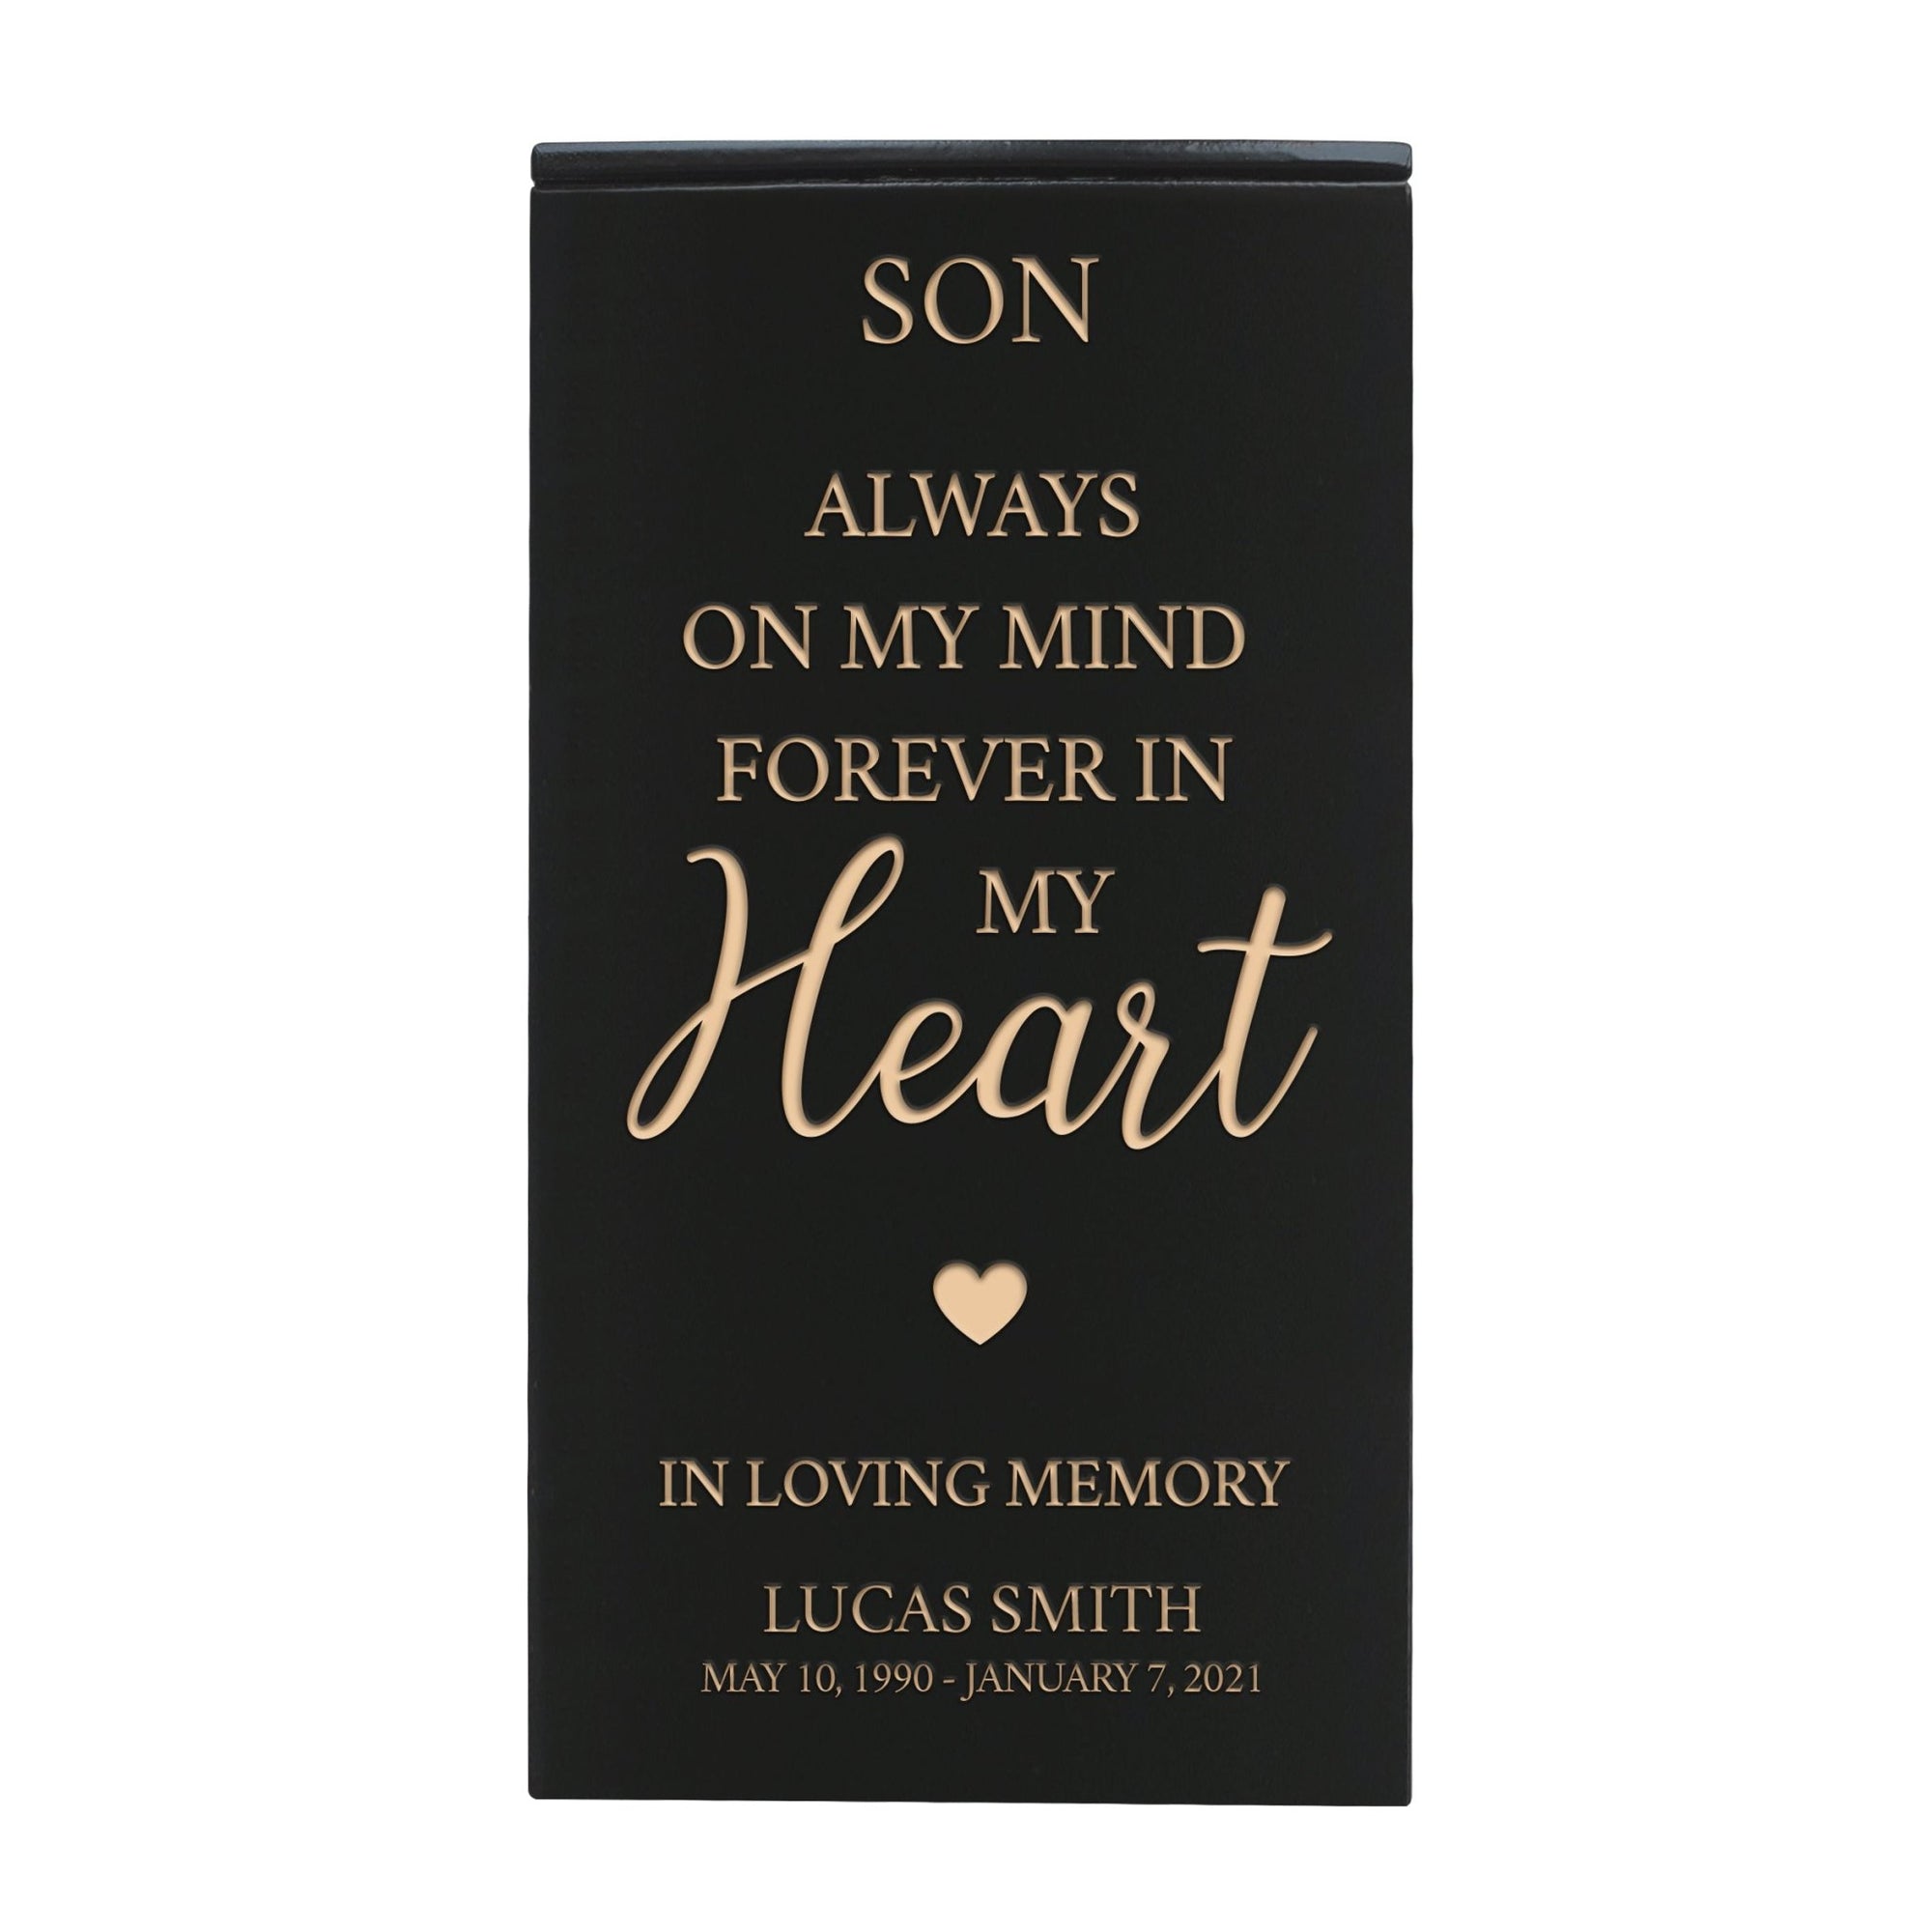 Custom Engraved Memorial Cremation Keepsake Urn Box holds 100 cu in of Ashes in - Son, Always On My Mind - LifeSong Milestones